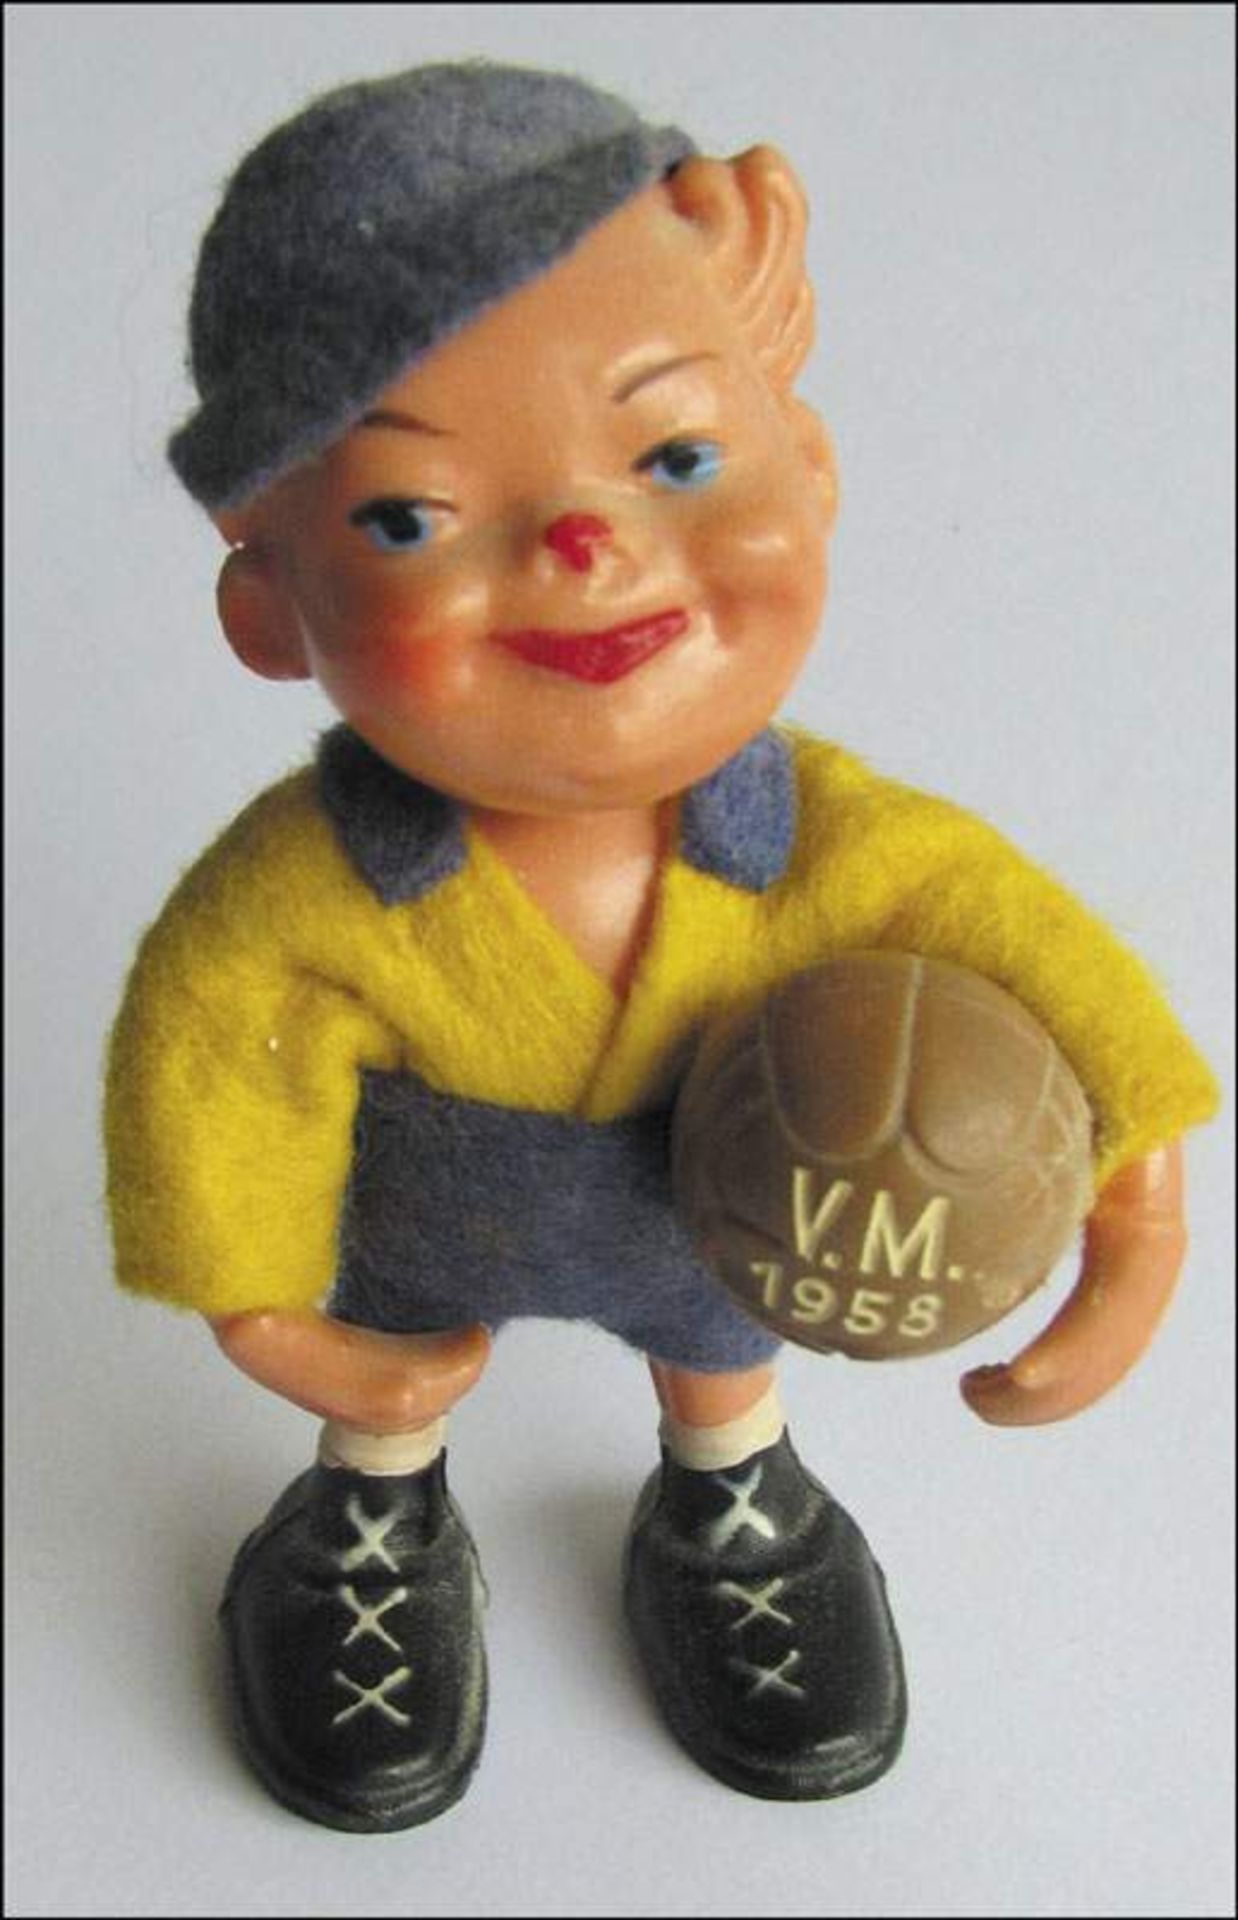 World Cup Sweden 1958. Rare official Mascot - Ball with inscription VM 1958 plastic figure with